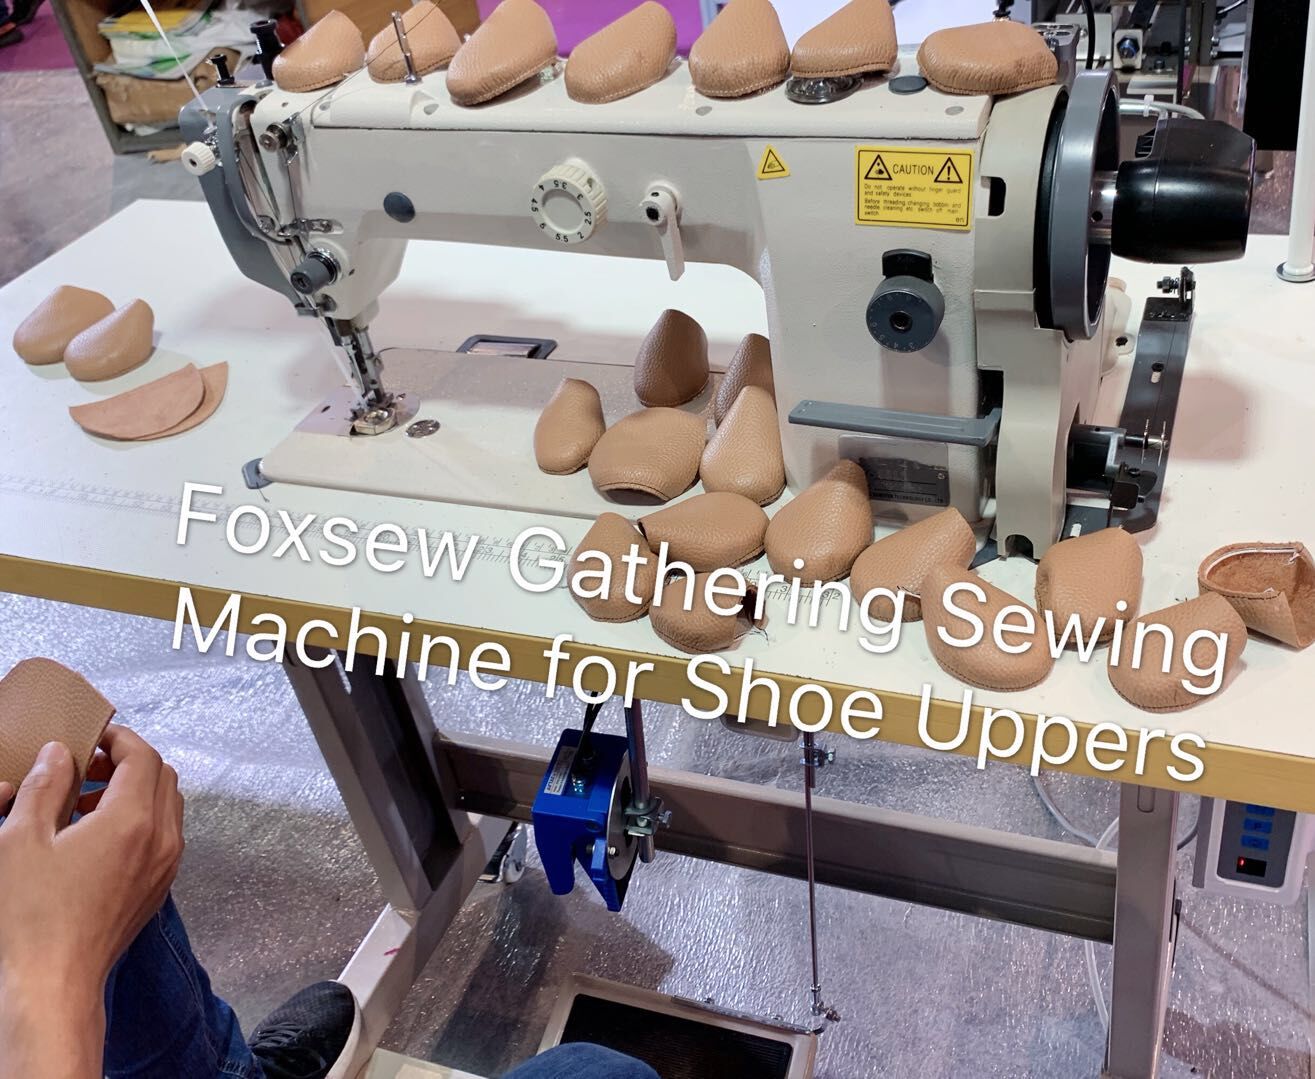 FOXSEW Gathering sewing machine for shoe uppers